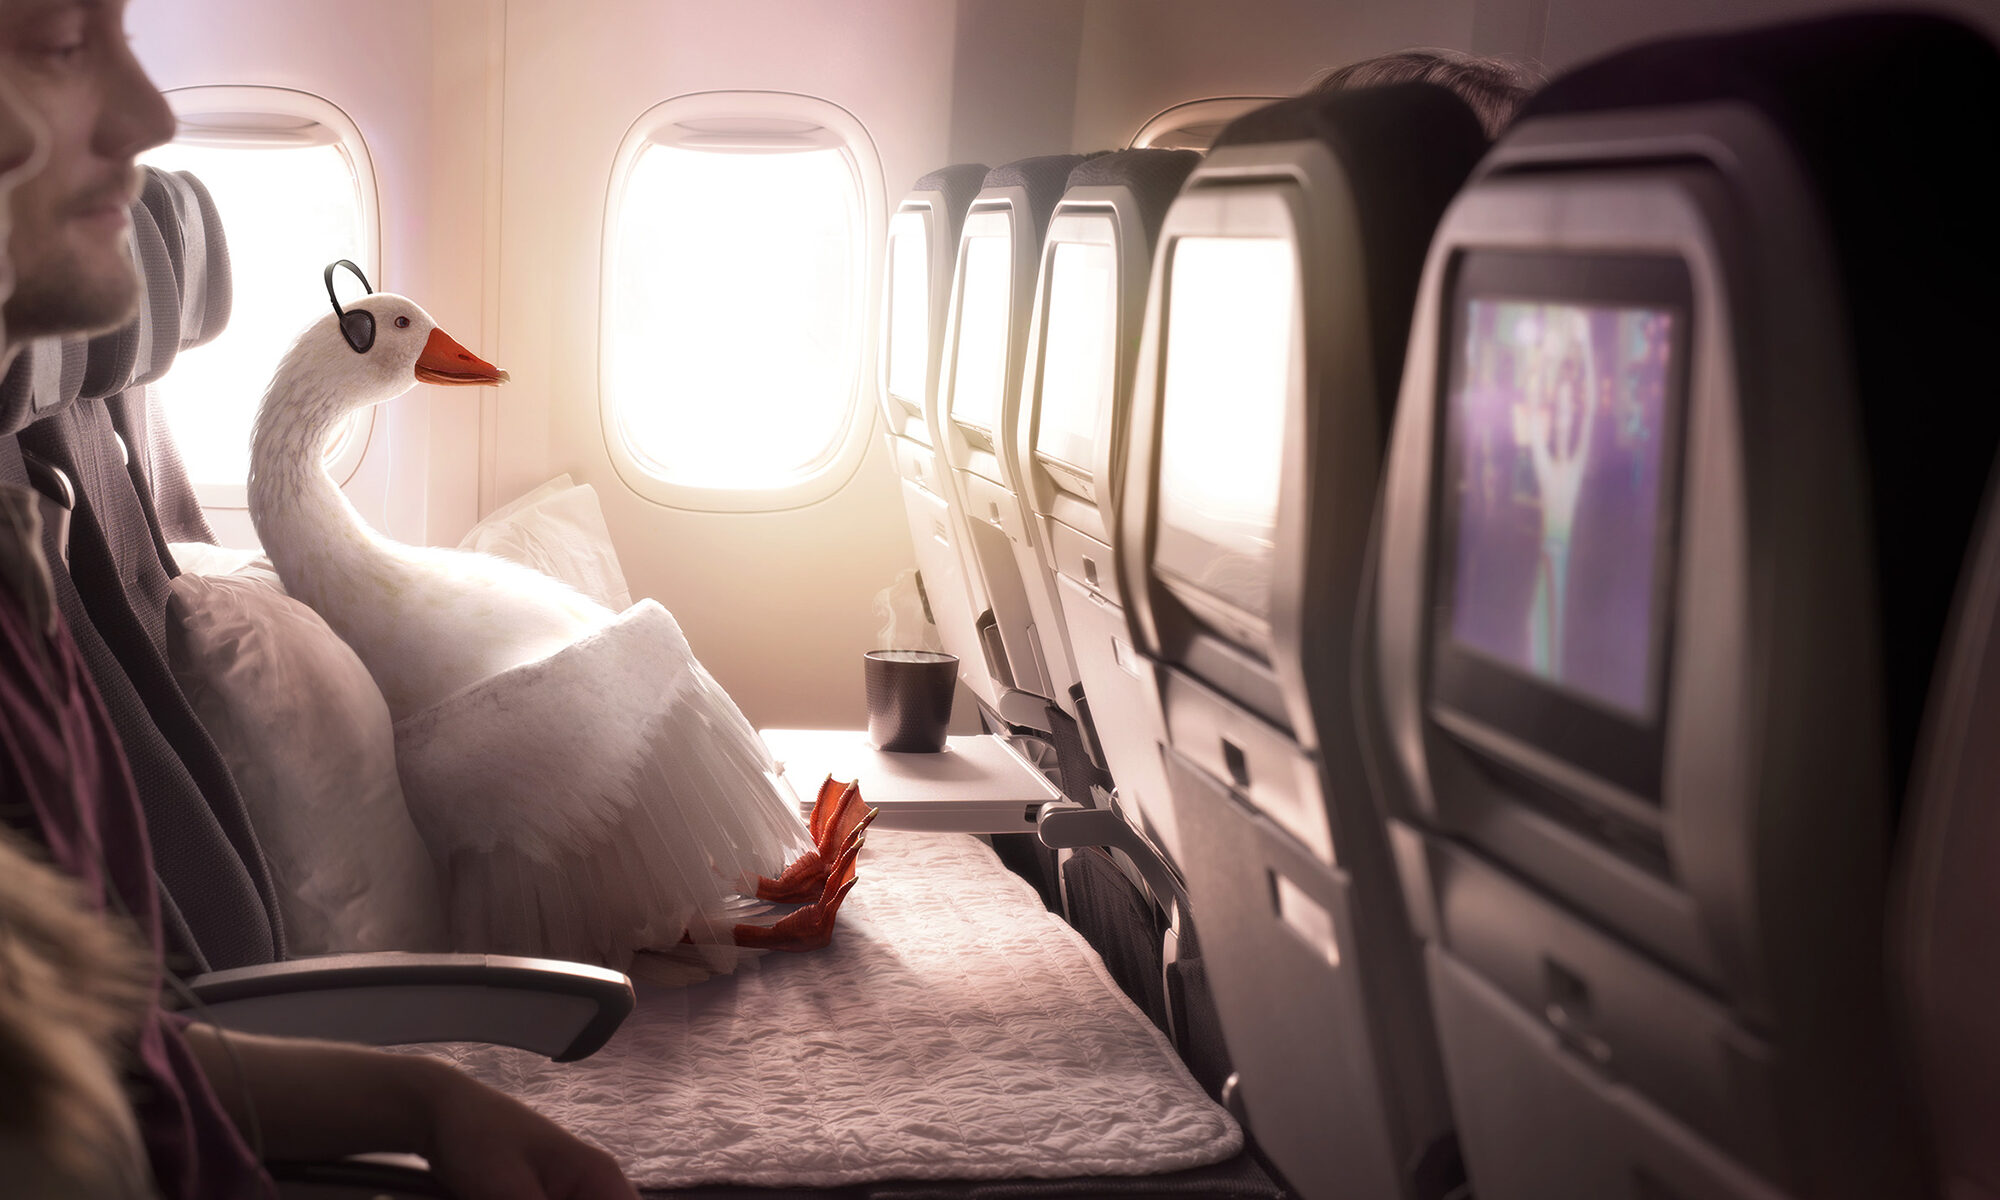 Air New Zealand Better Way To Fly with Dave the Goose